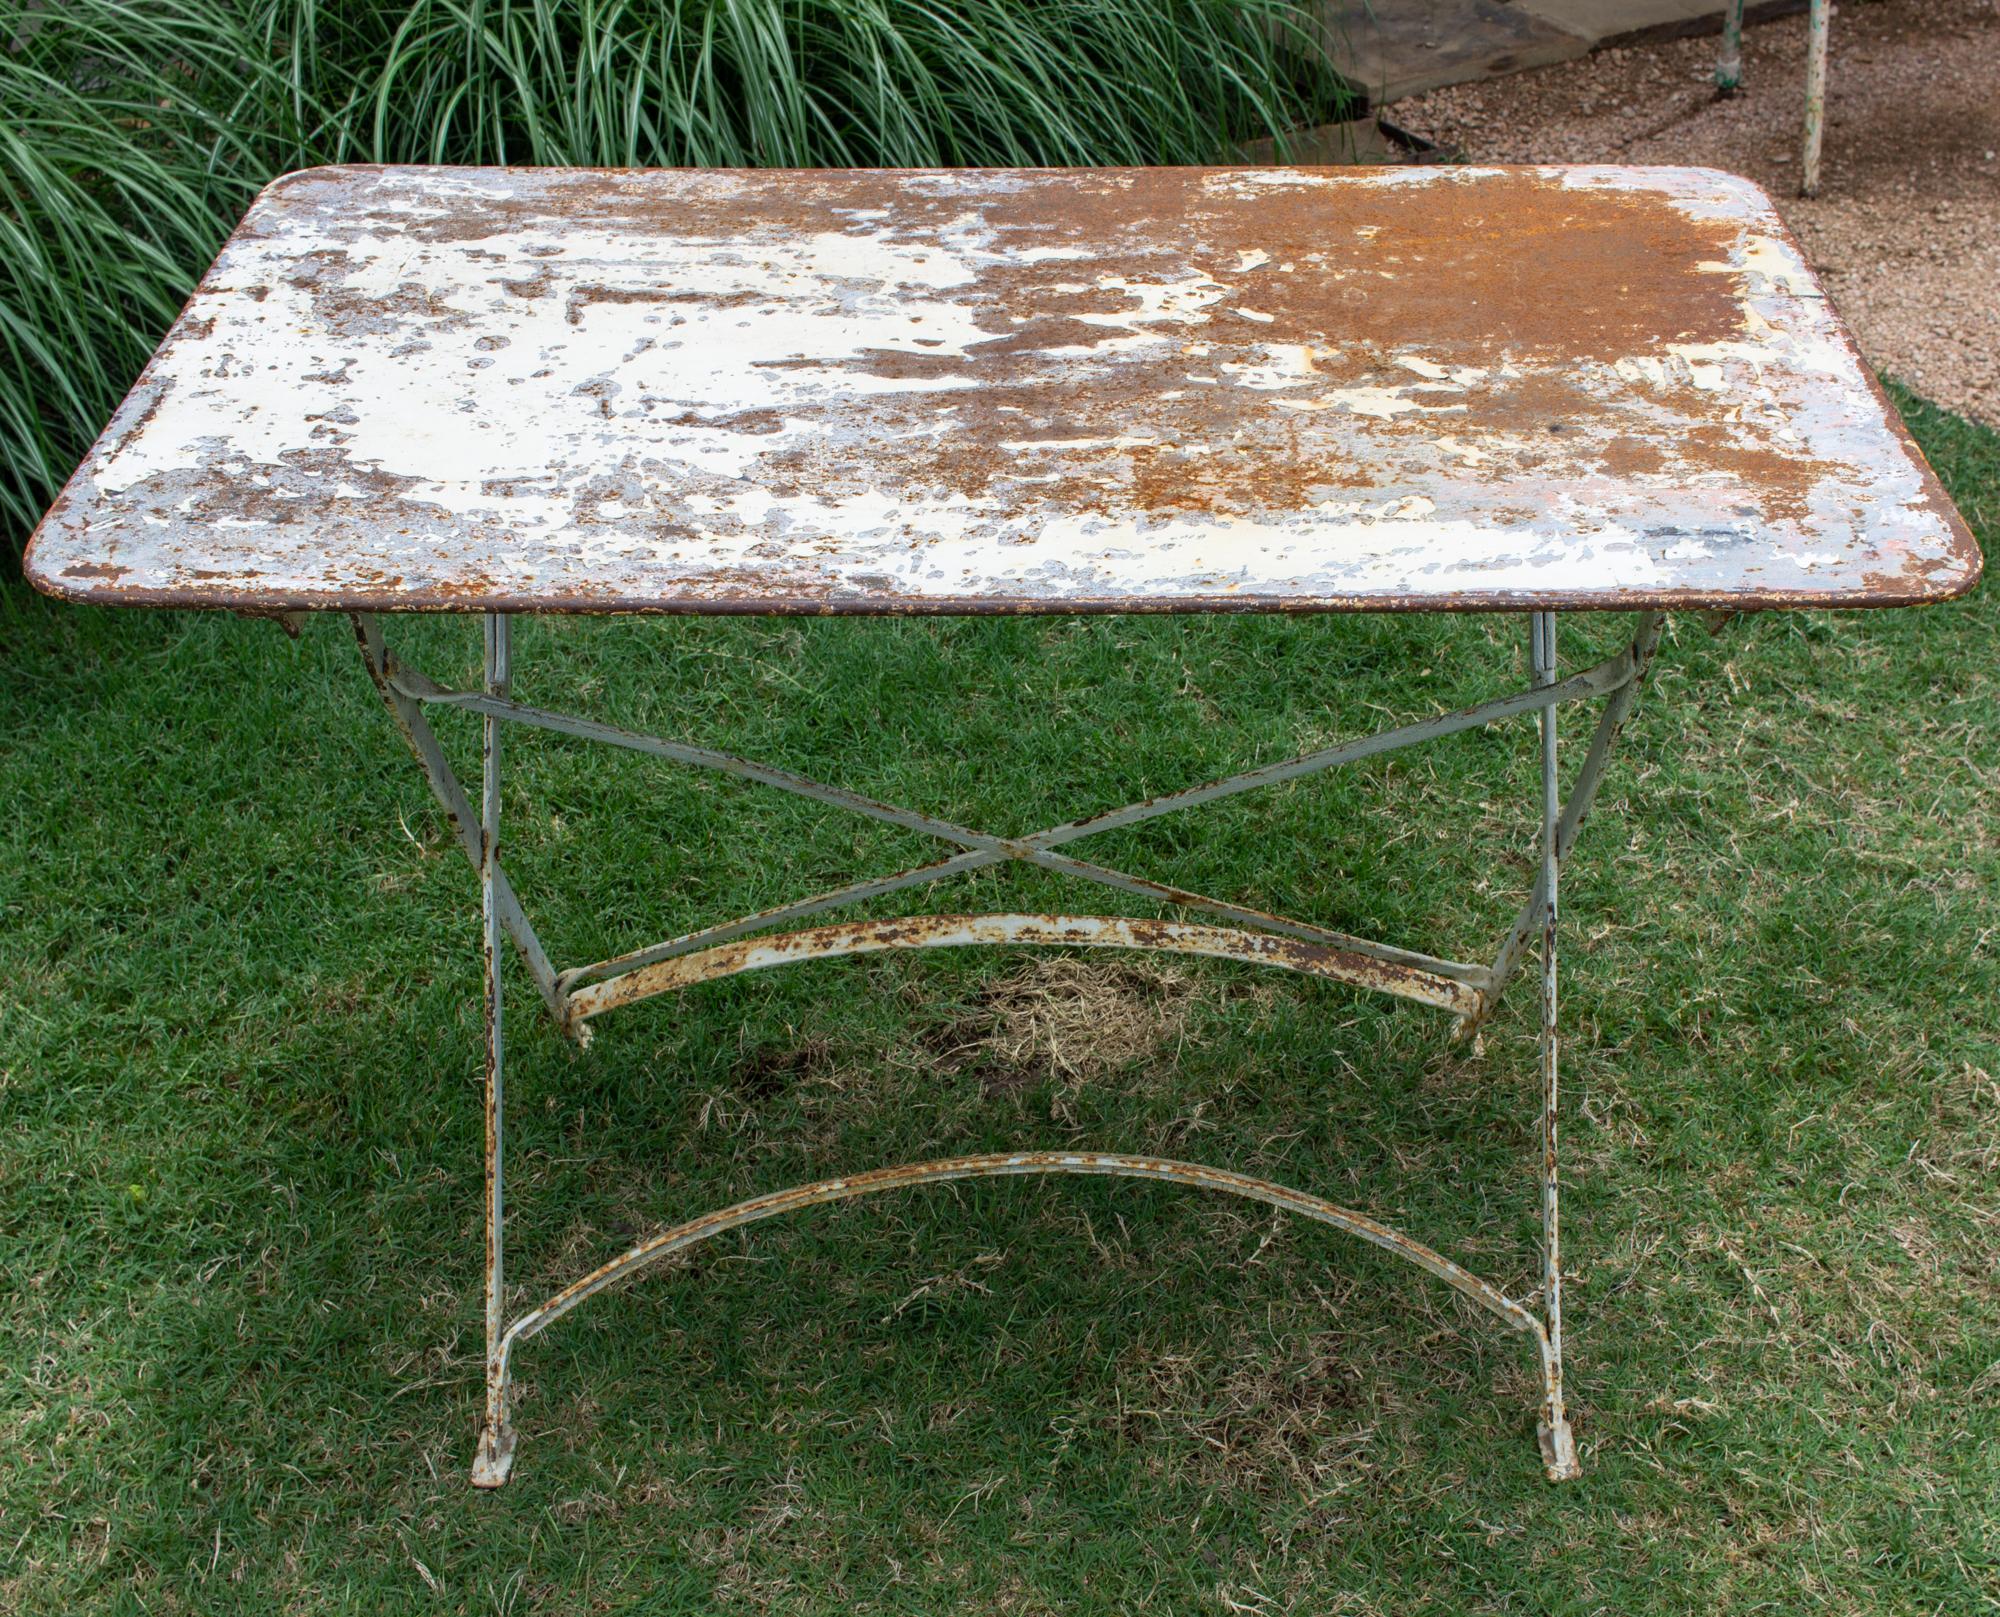 This antique French garden table is crafted in metal with a distressed painted finish. The table folds flat for storage when not in use. The top has rounded corners and a wonderful patinated finish. The base has an X detail on one side and curved